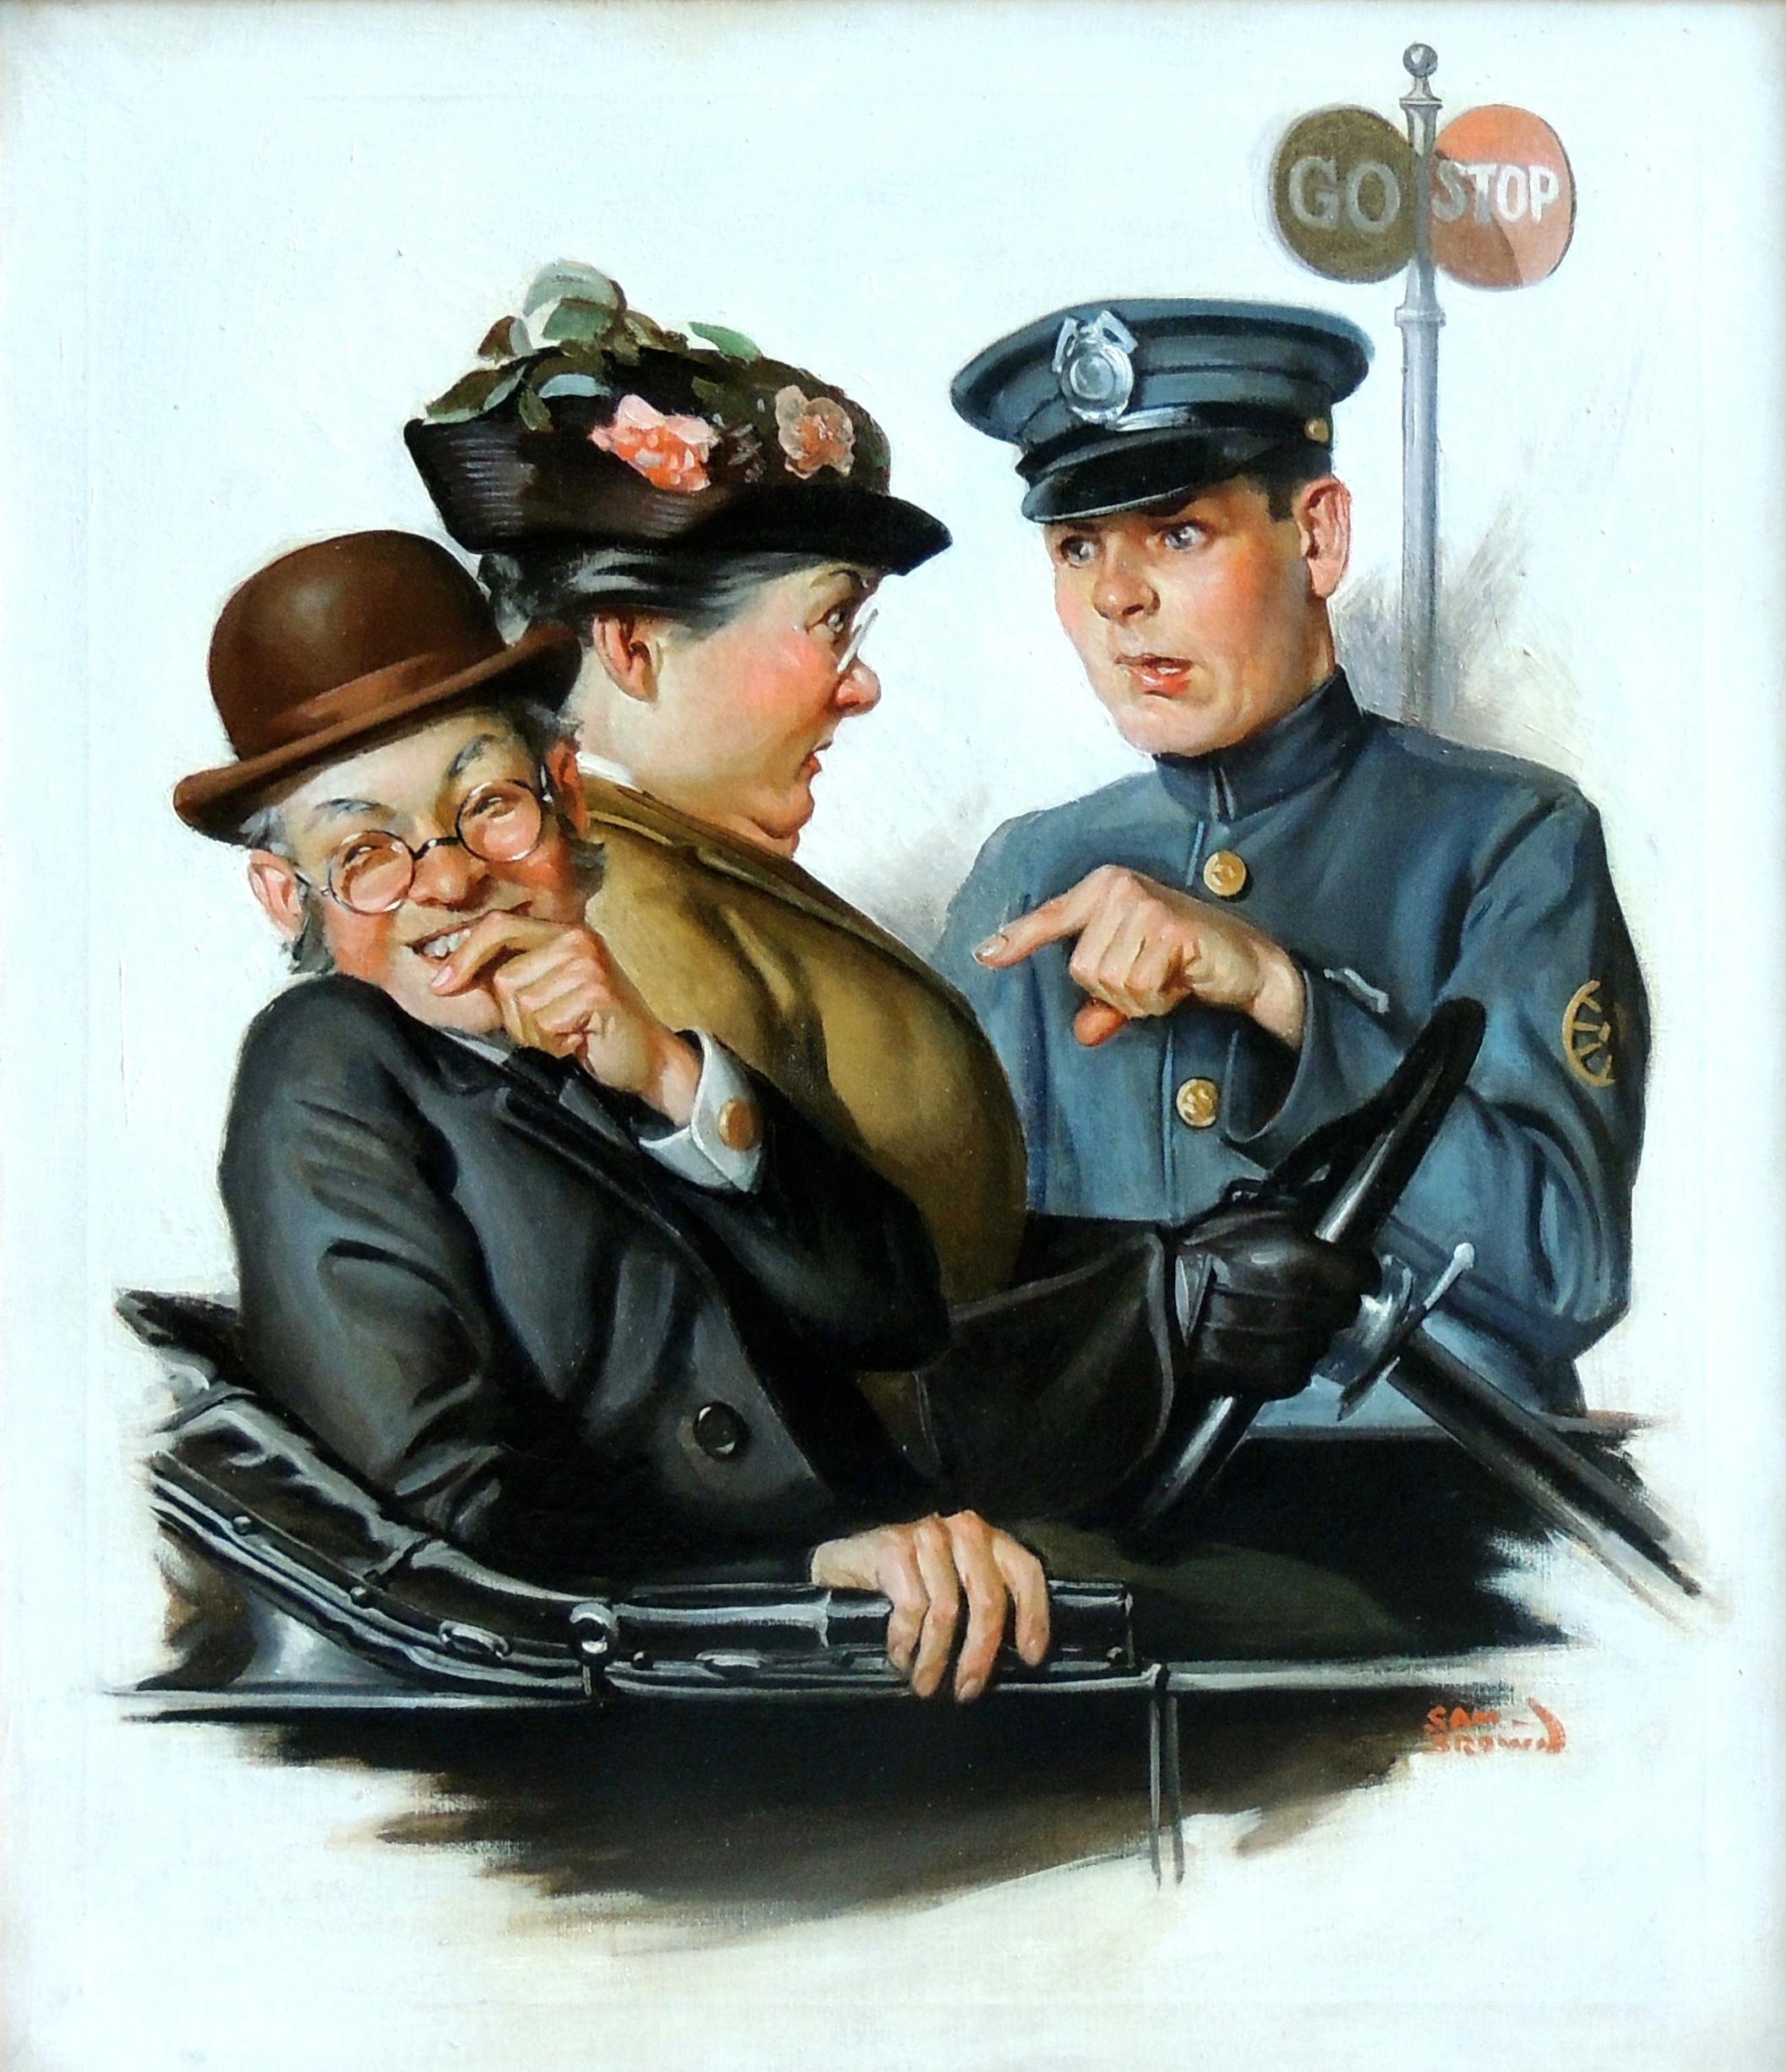 Stop and Go, The Elks Magazine Cover - Painting by Samuel Joseph Brown